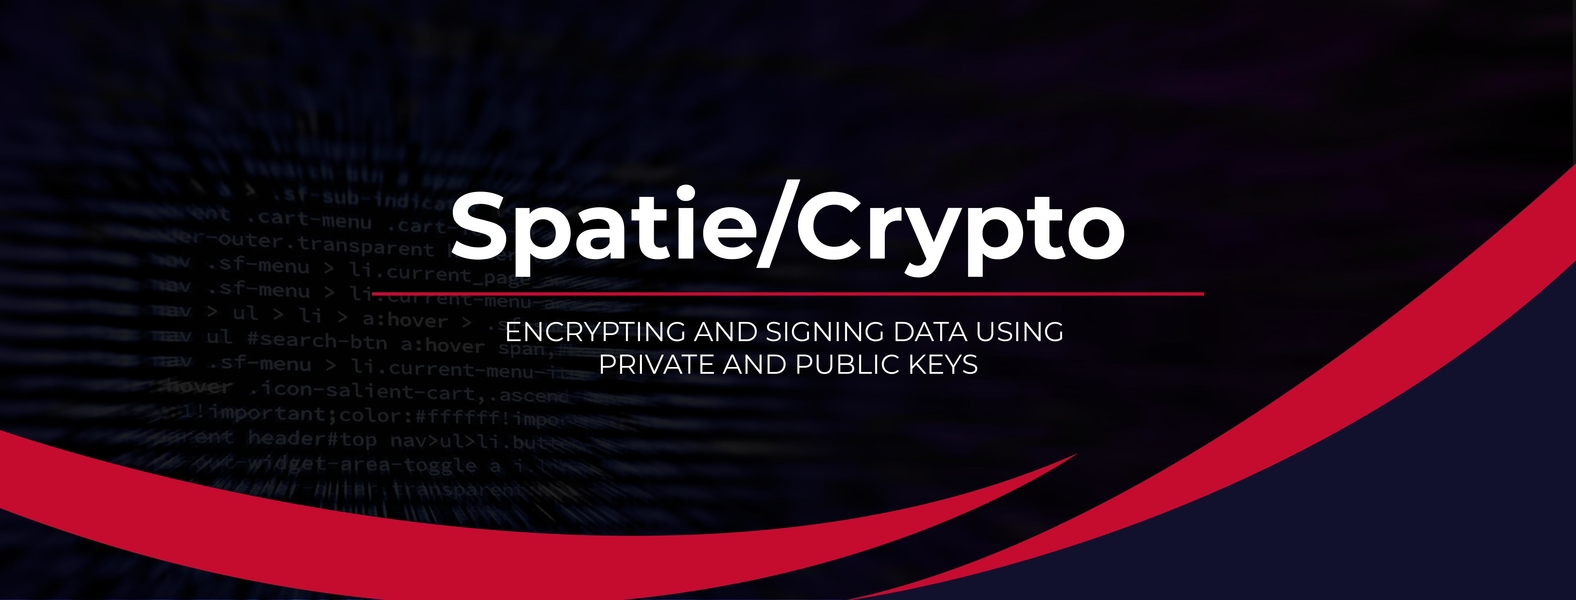 Crypto - Encrypt and sign data in Laravel using private & public keys